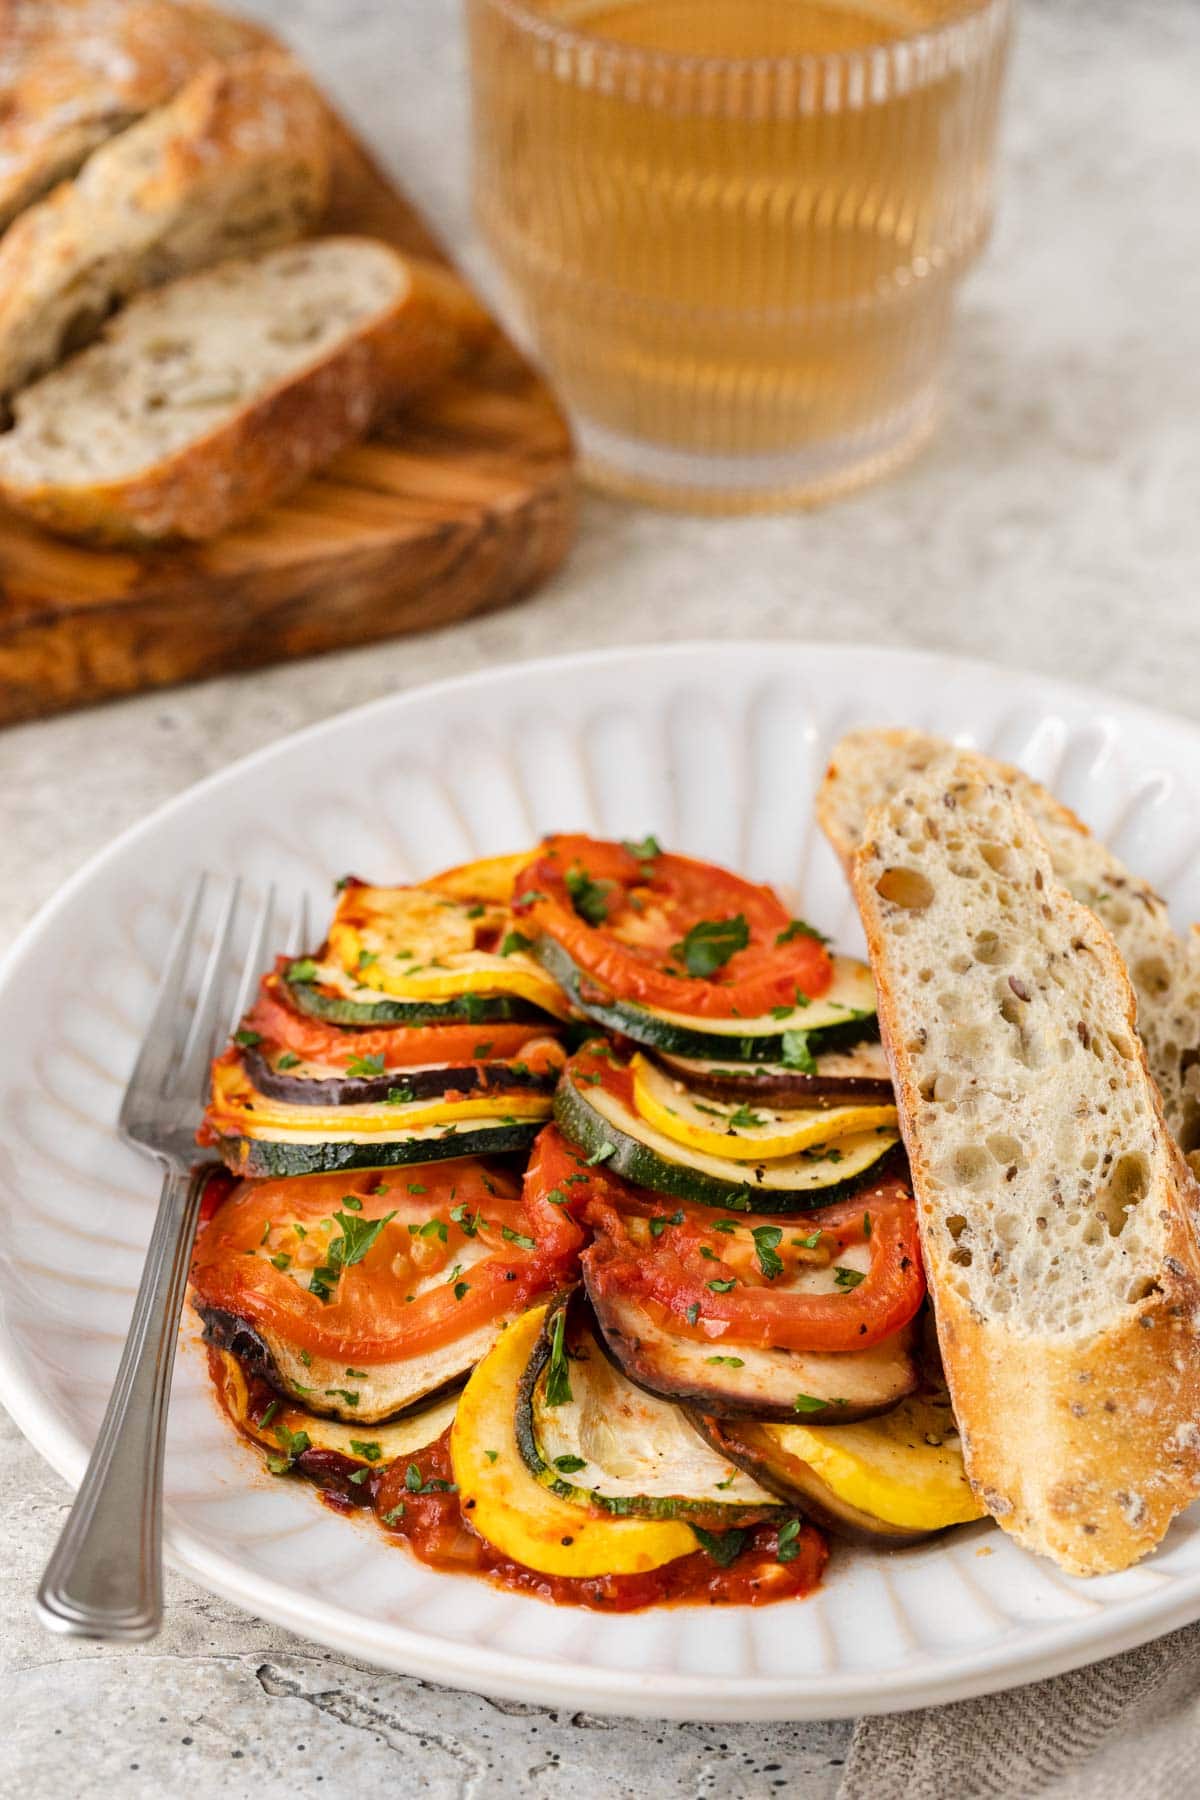 ratatouille on plate with sliced bread